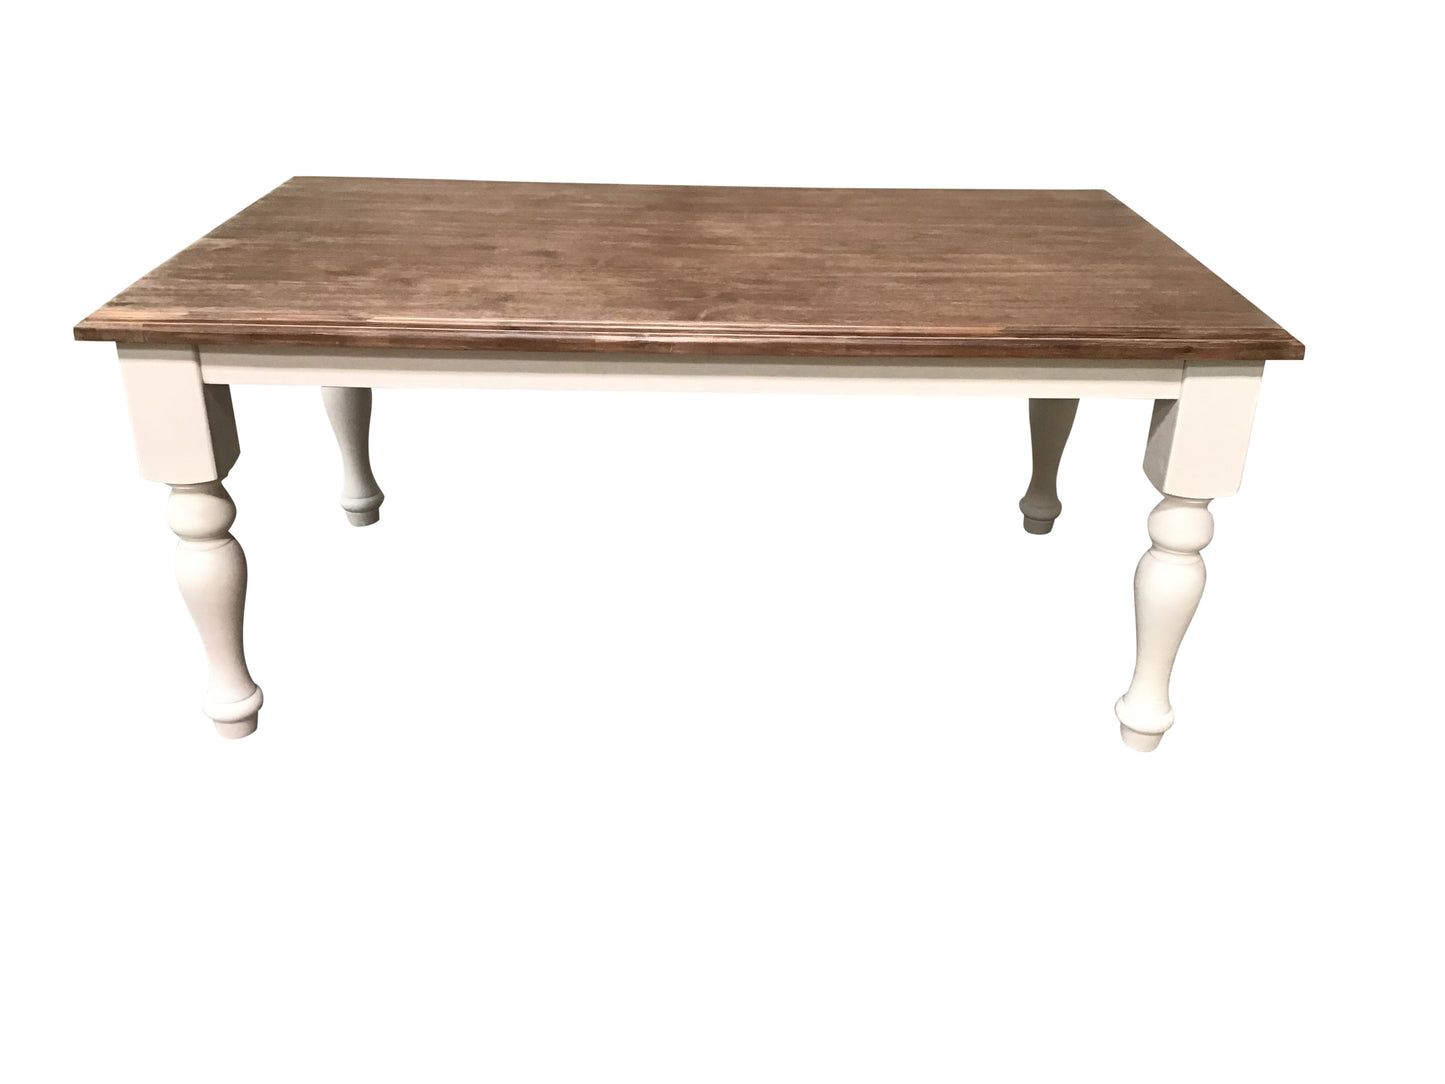 Biarritz 1.8m Dining Table painted off-white